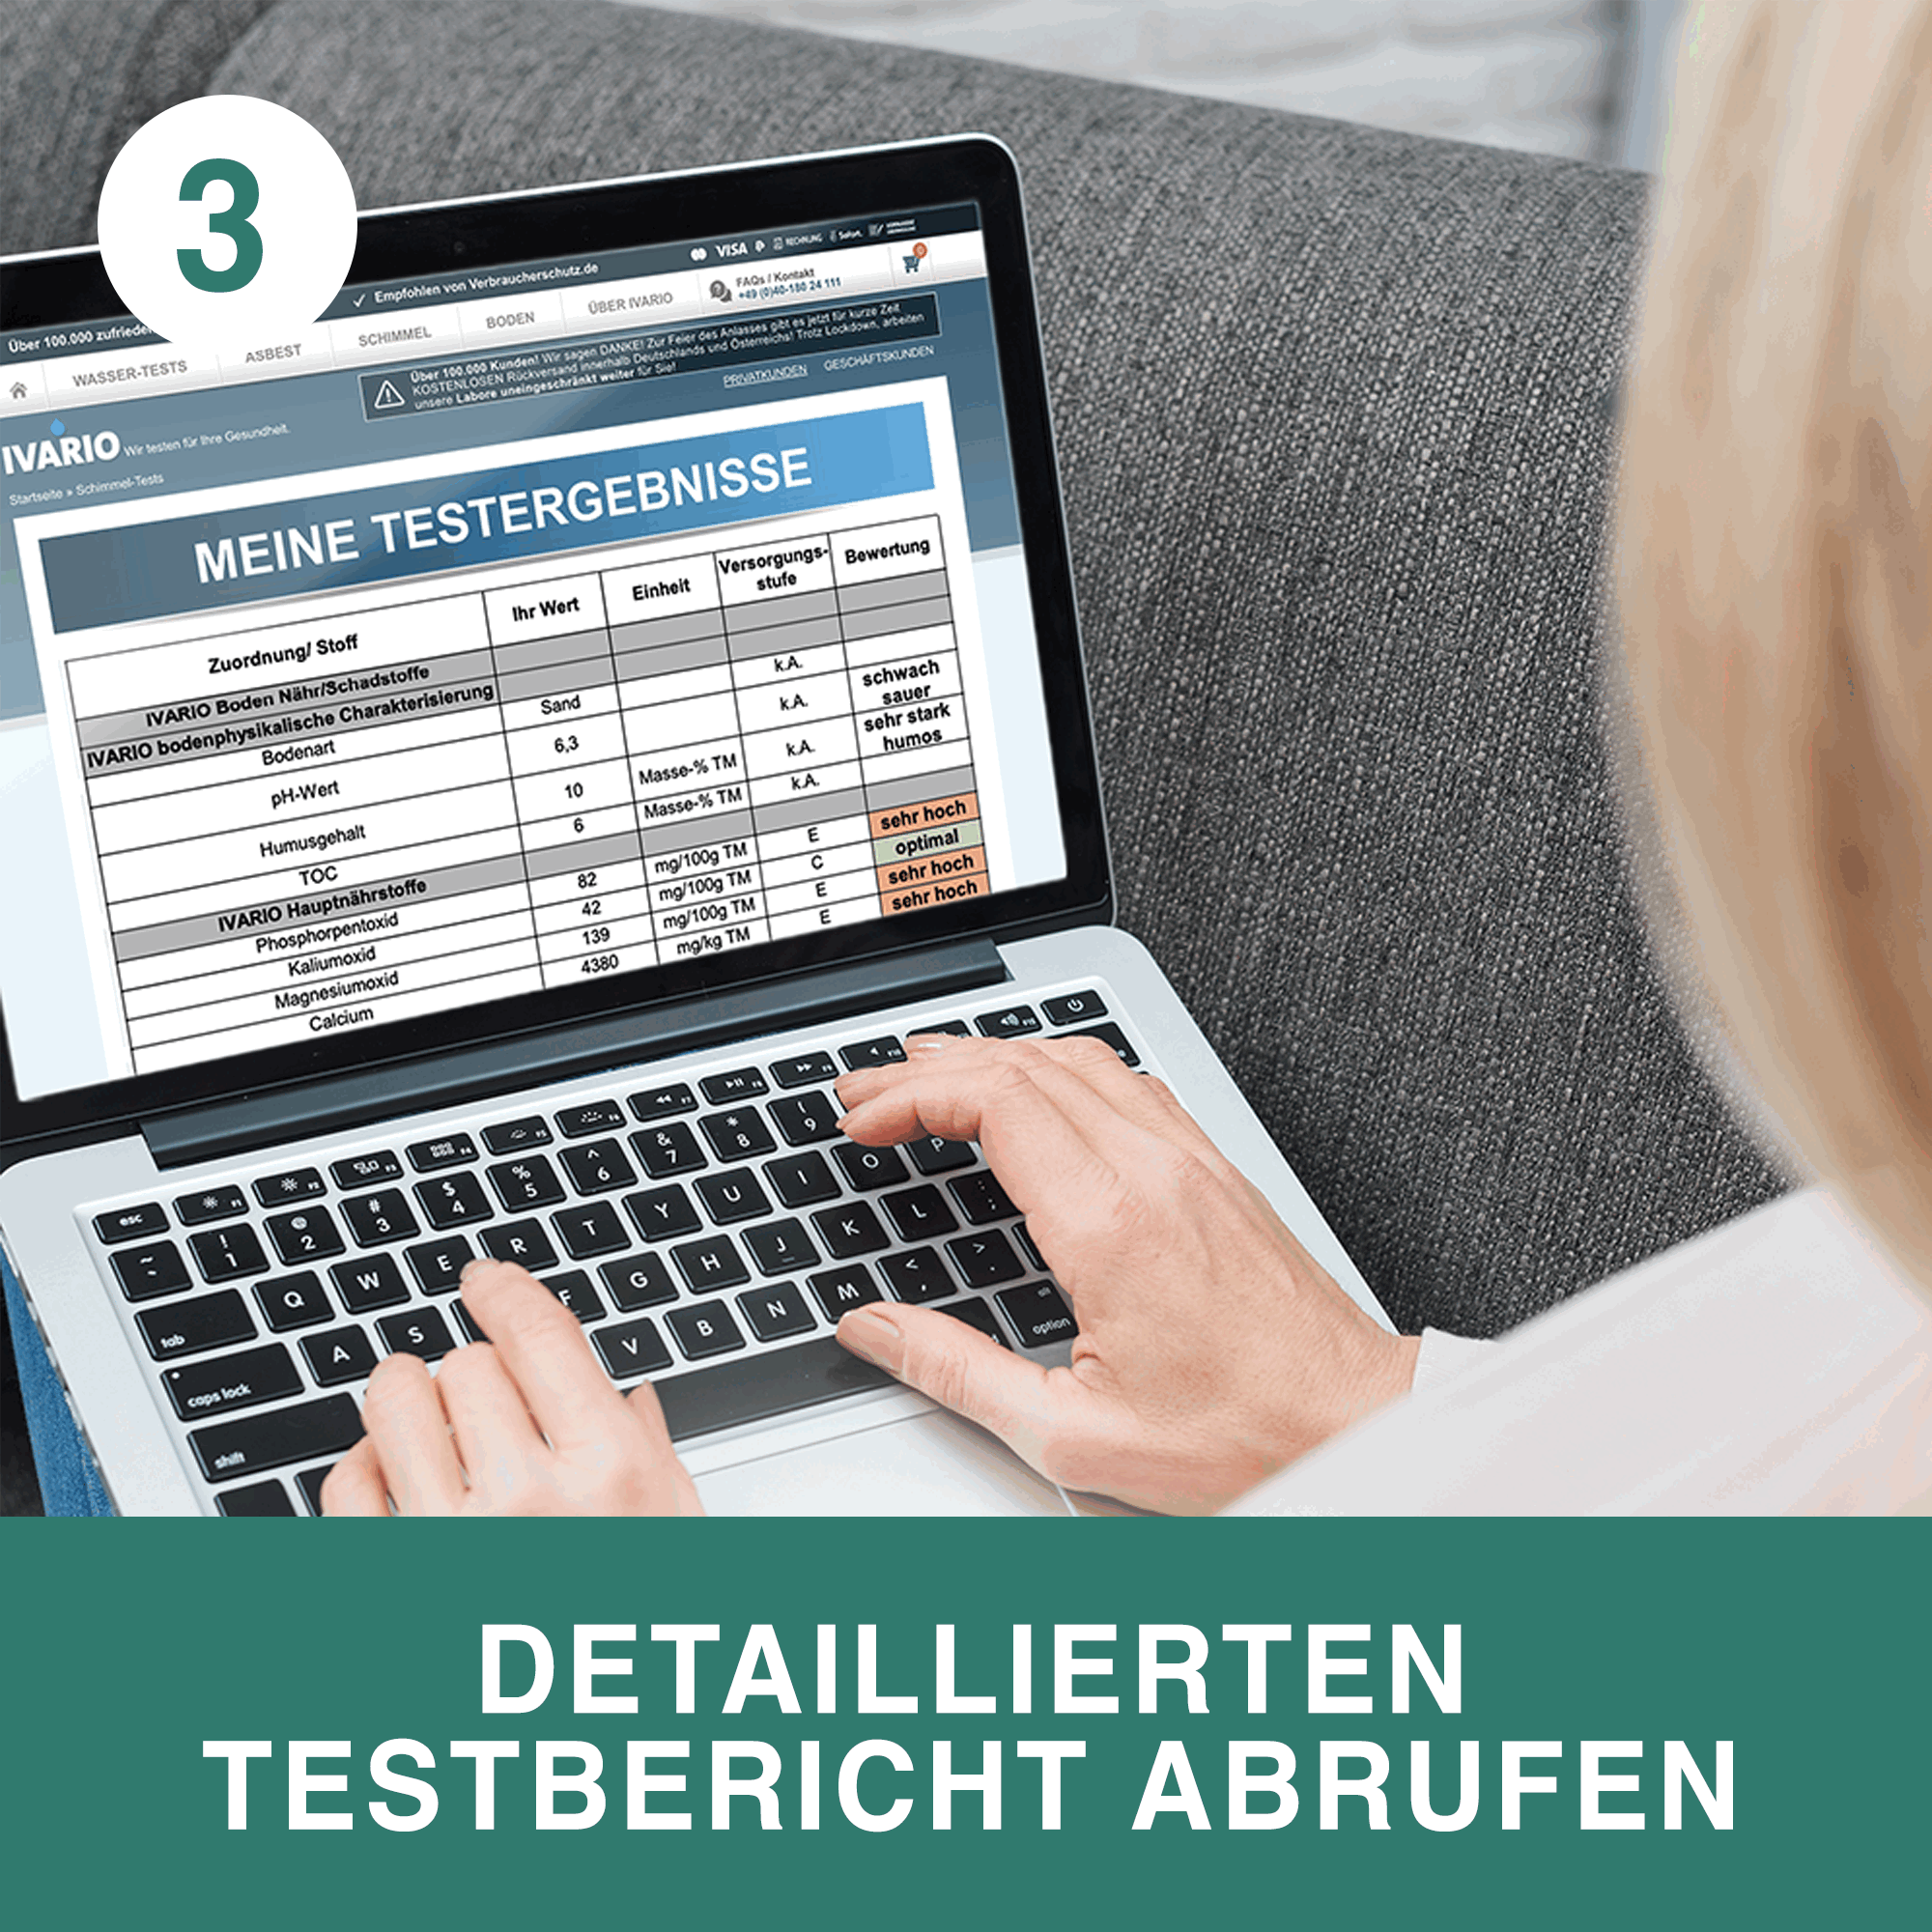 Bodentest '2-in-1 Komplett' 19 Prüfwerte + product picture